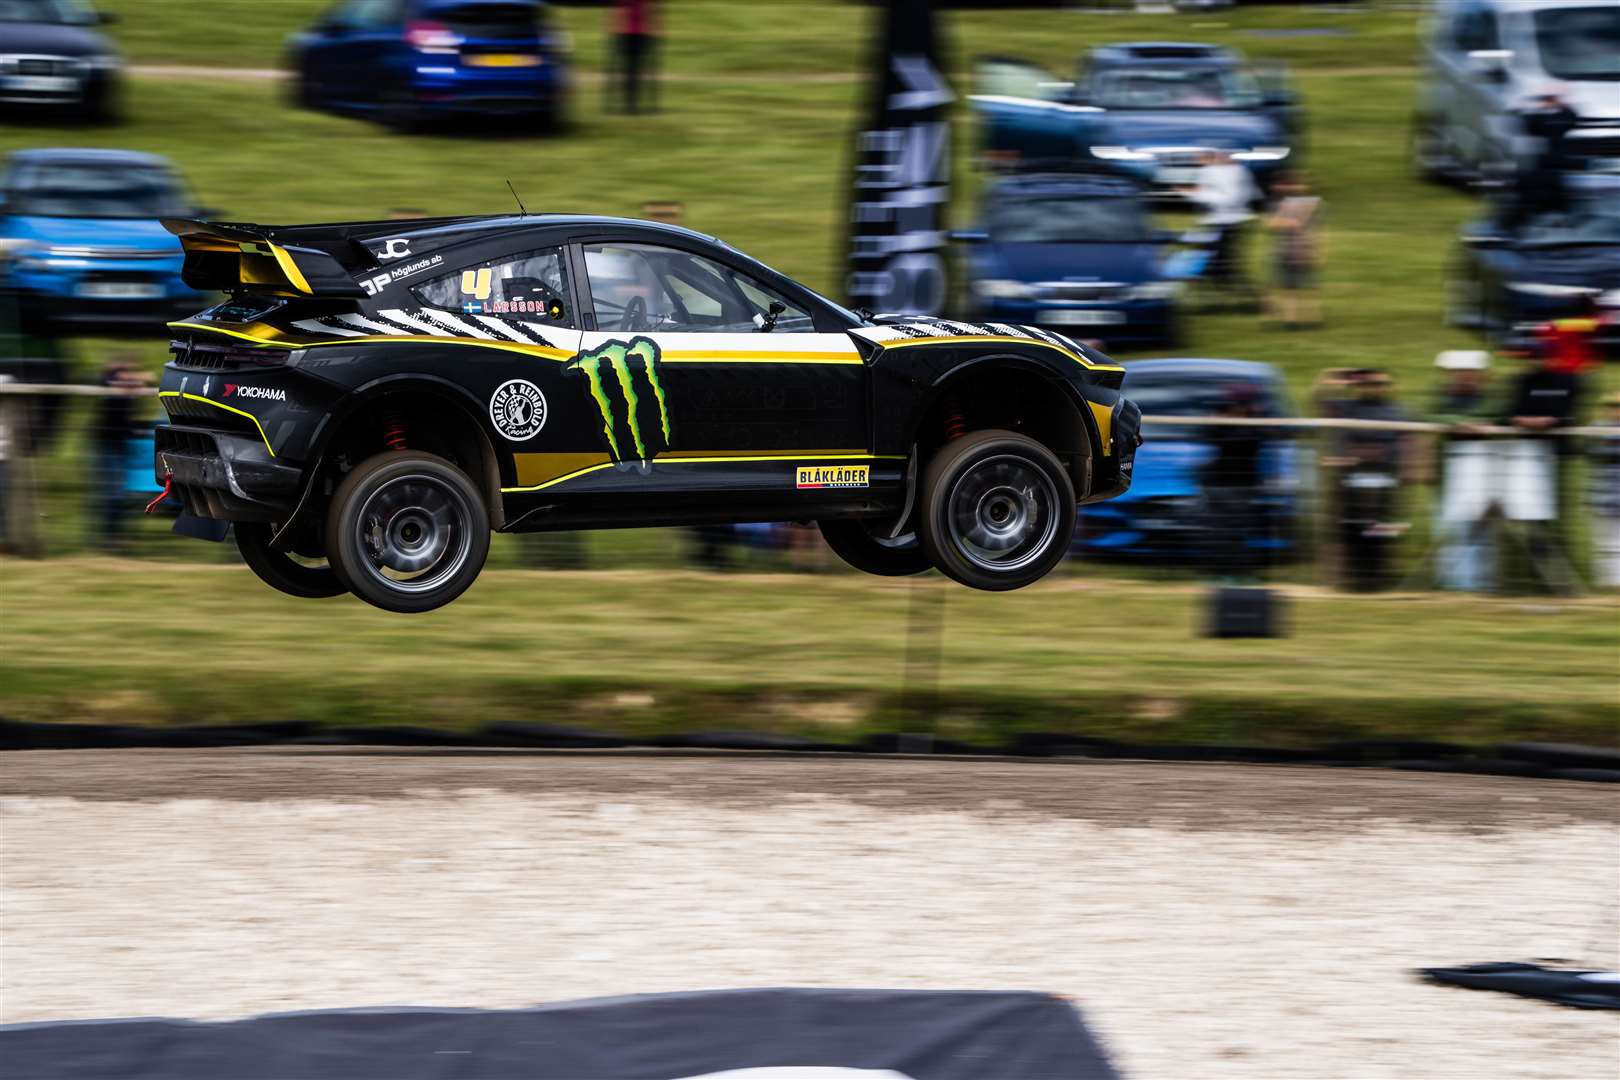 Event winner Robin Larsson, a two-time European Rallycross champion, takes off over the jump. Picture: Nitro Rallycross